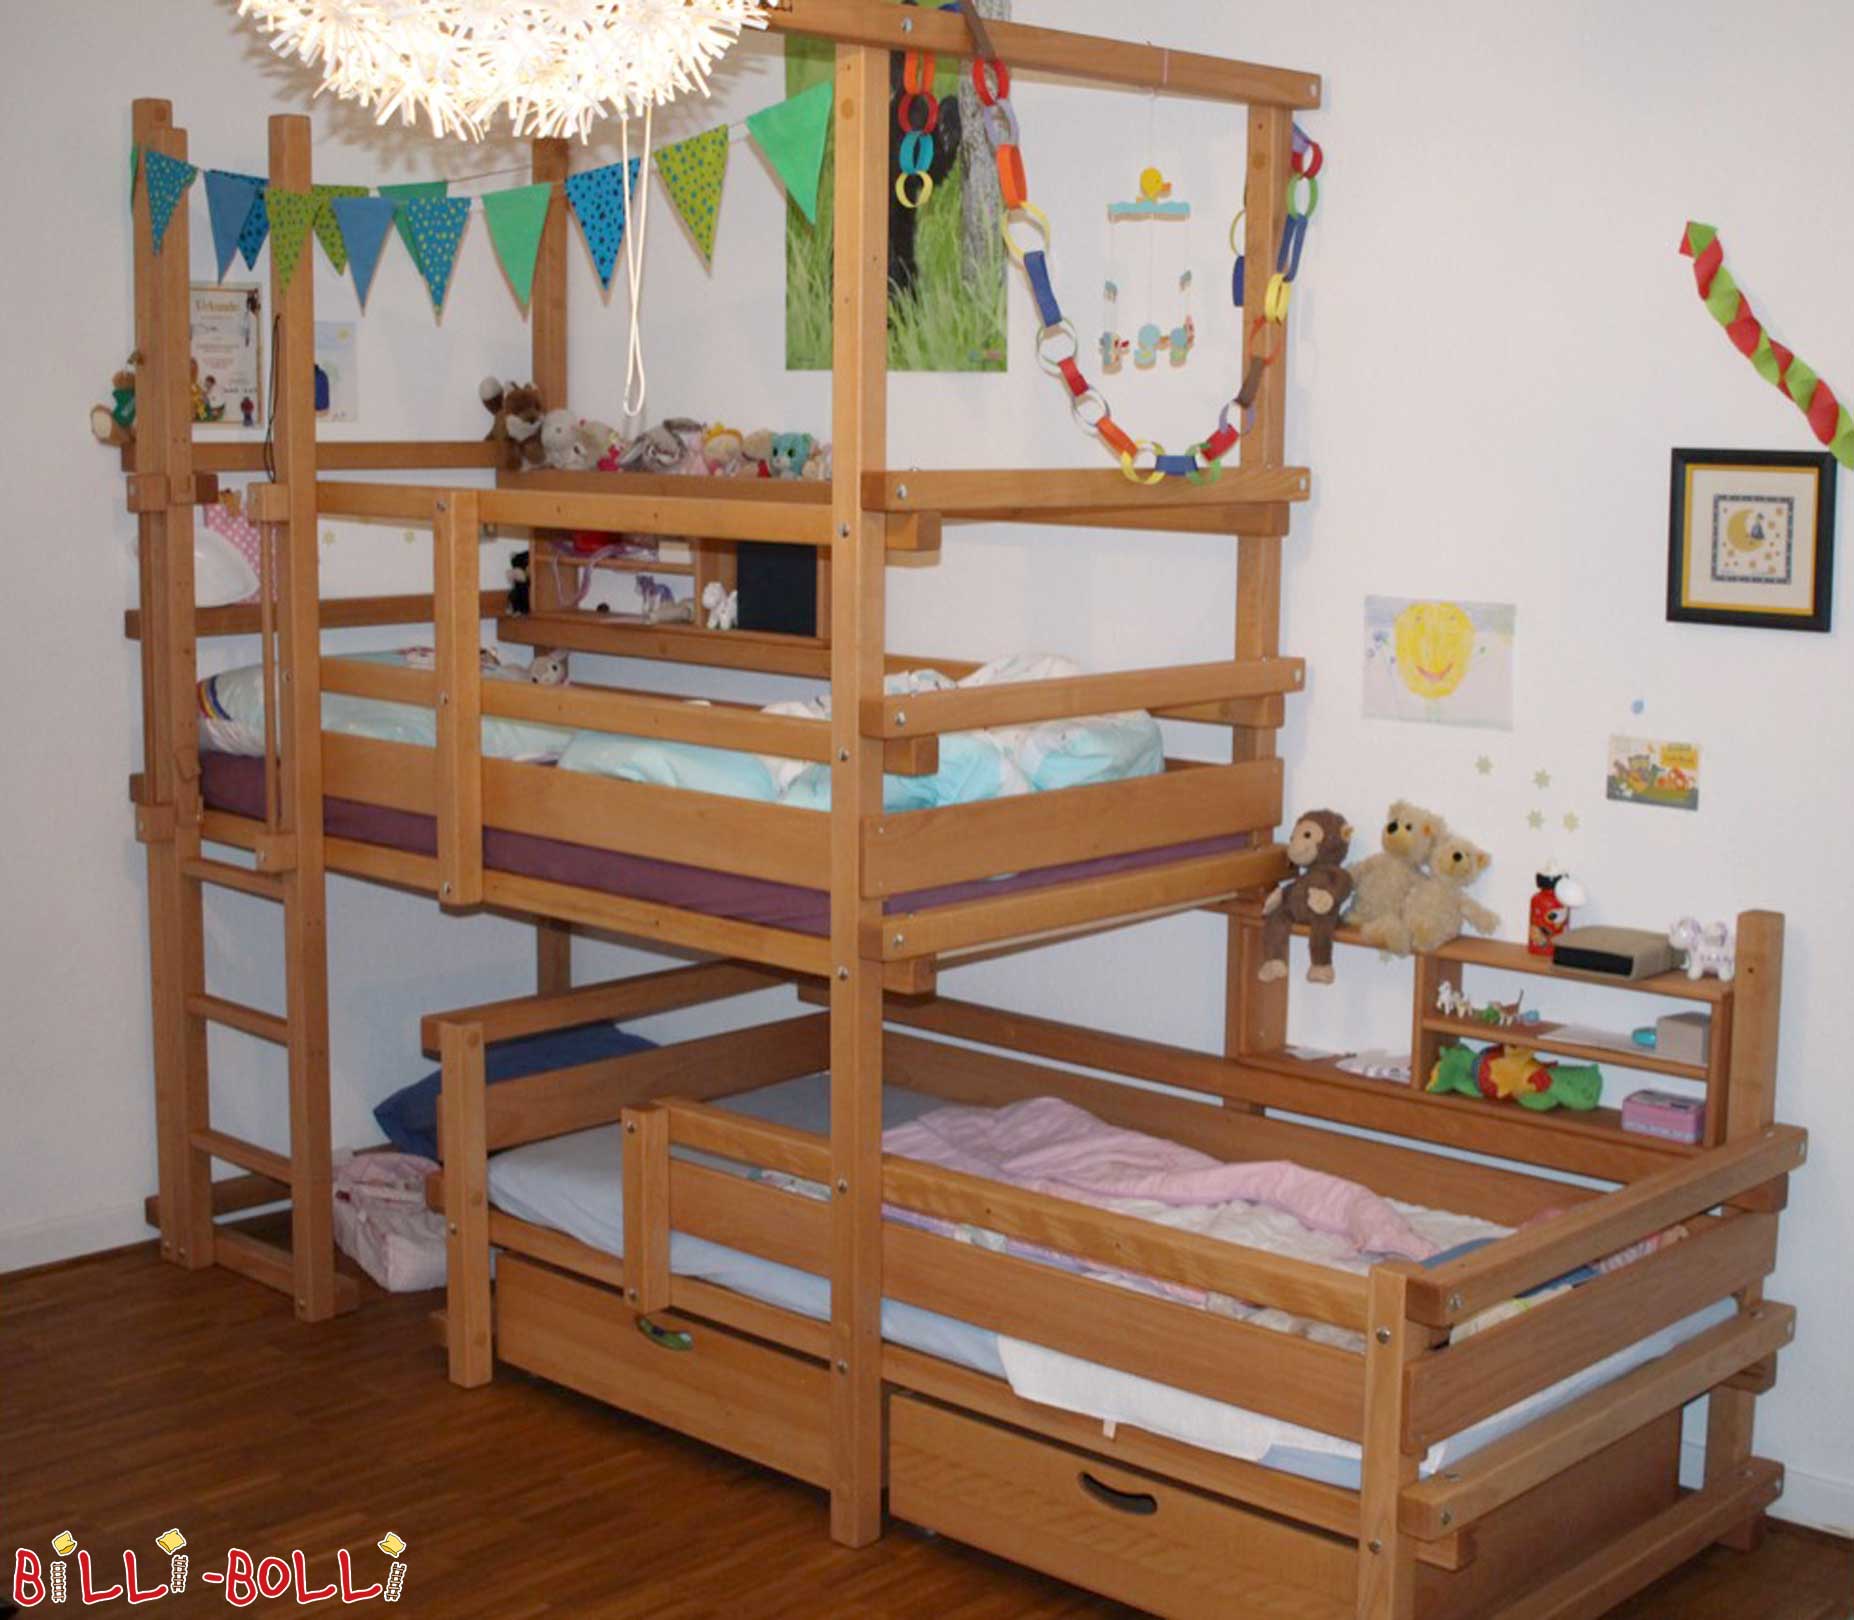 The top bunk of this Bunk Bed Laterally Staggered has initially been assembled … (Bunk Bed Laterally Staggered)